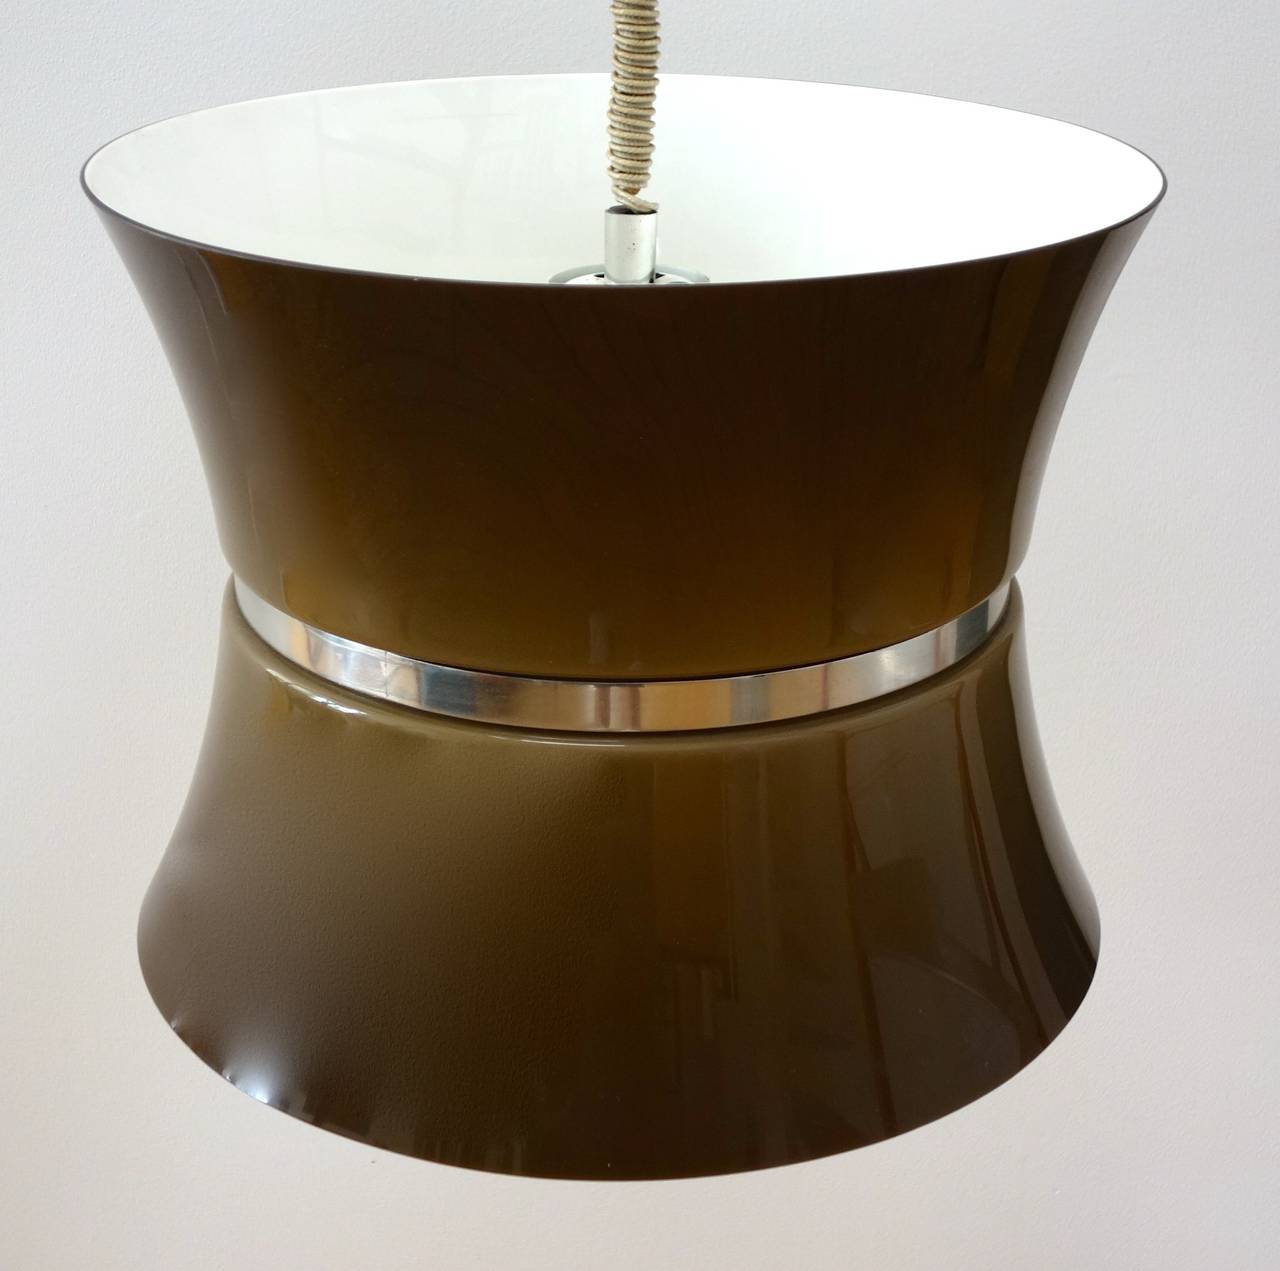 A fantastic, cylindrical shaped Italian pendant light from the 1970s.